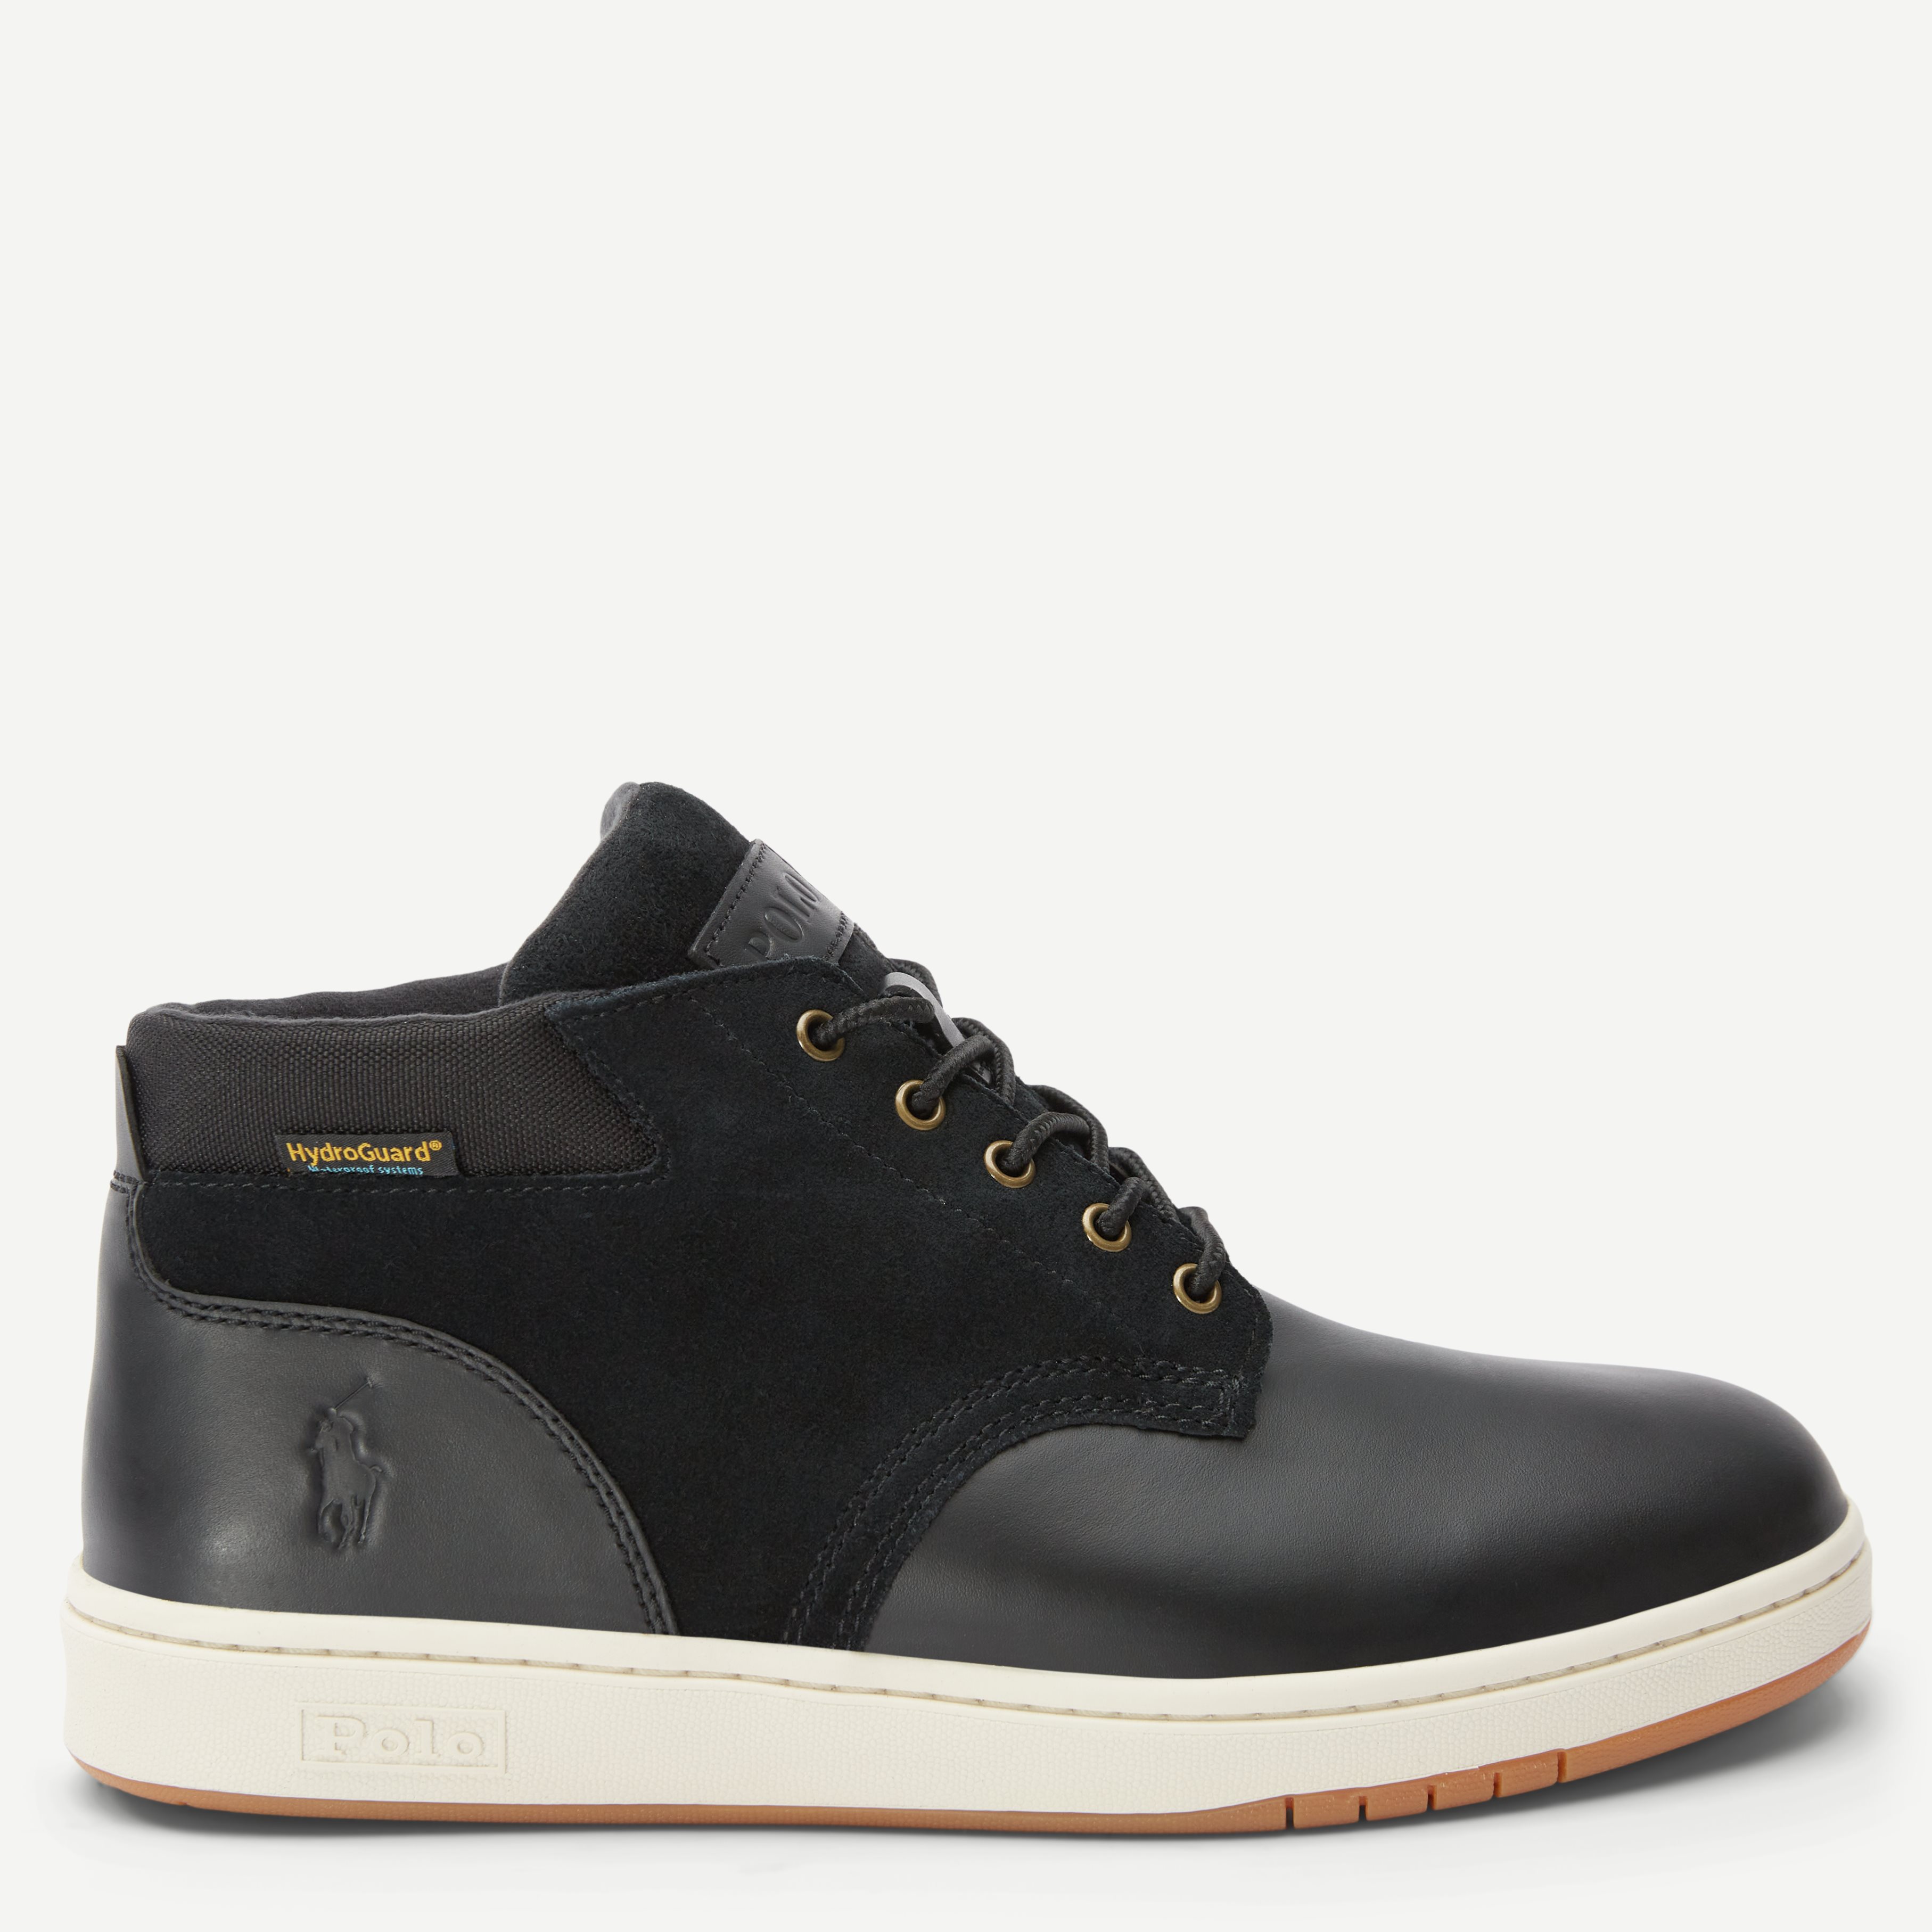 Sneaker Boot - Shoes - Black